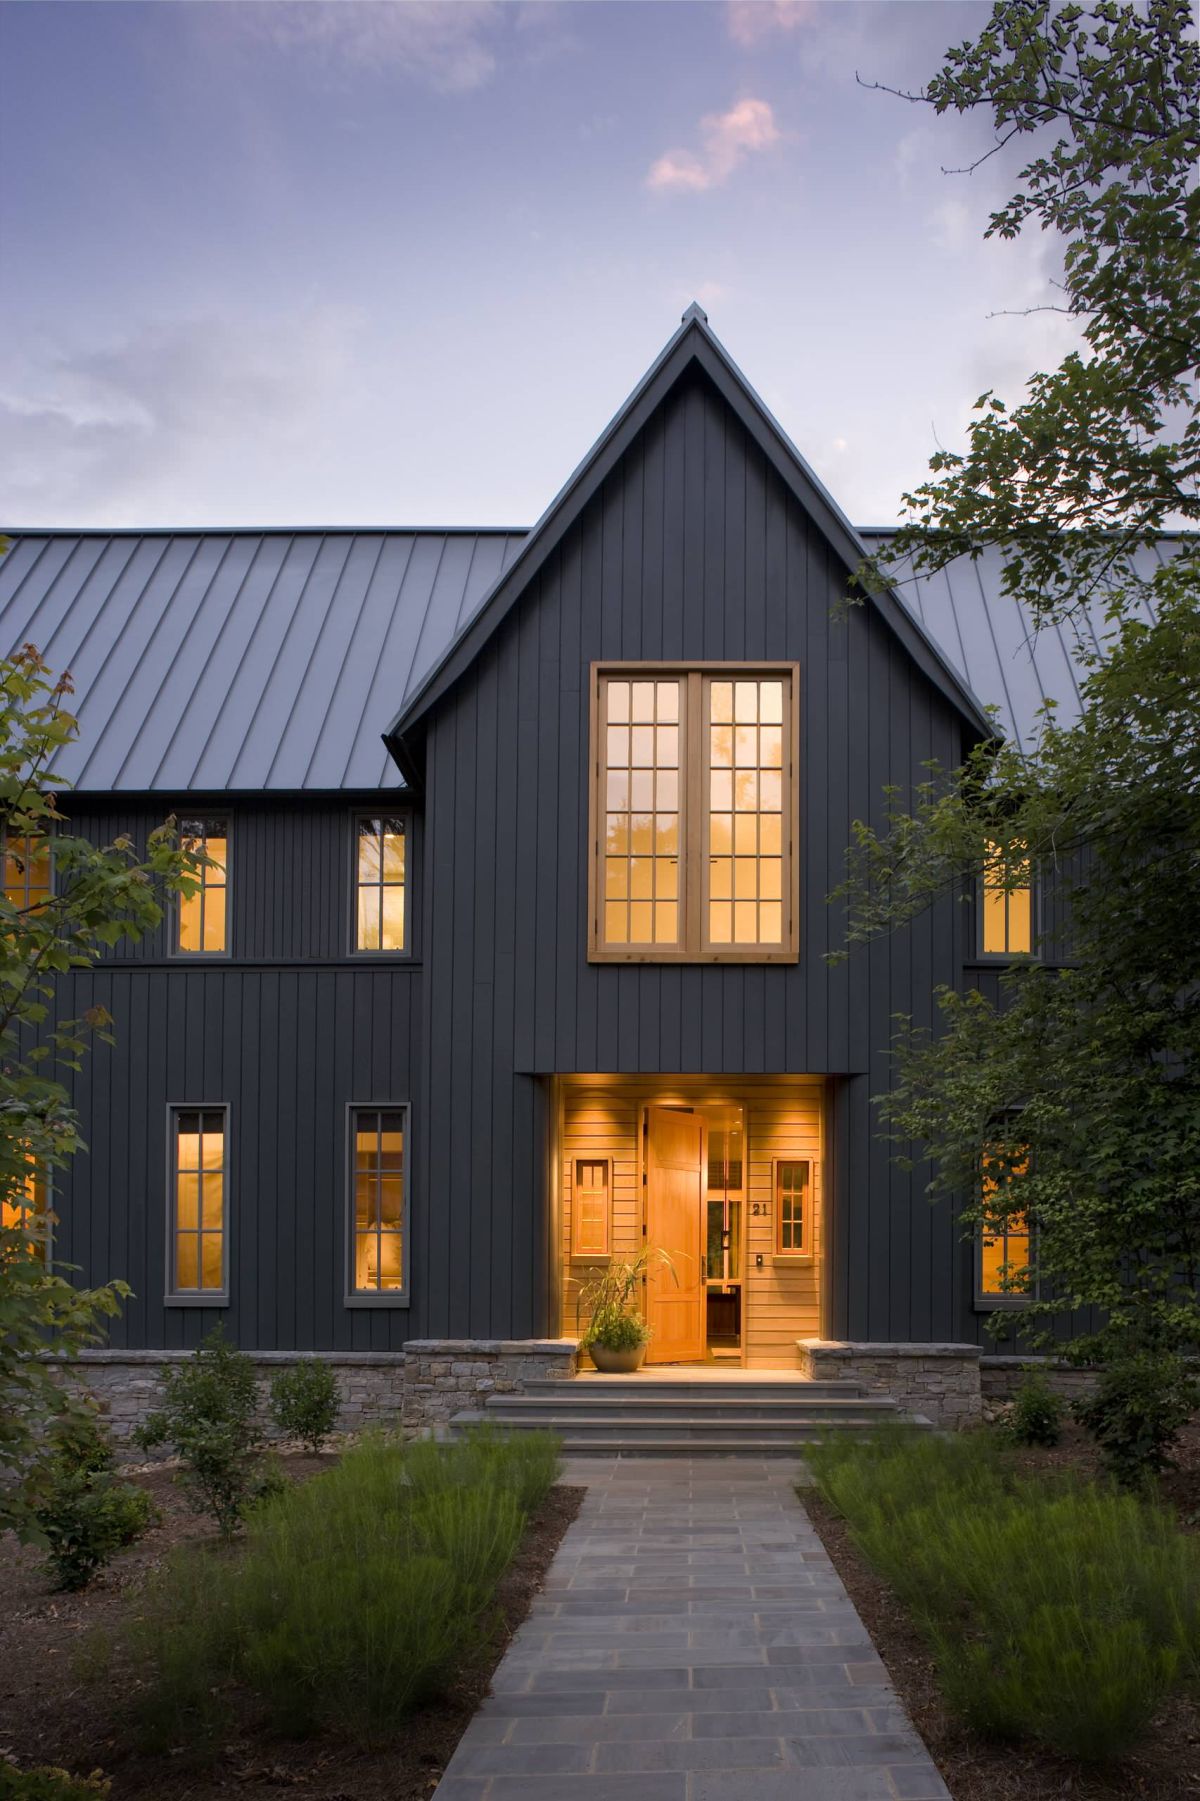 Black transitional house with vertical siding